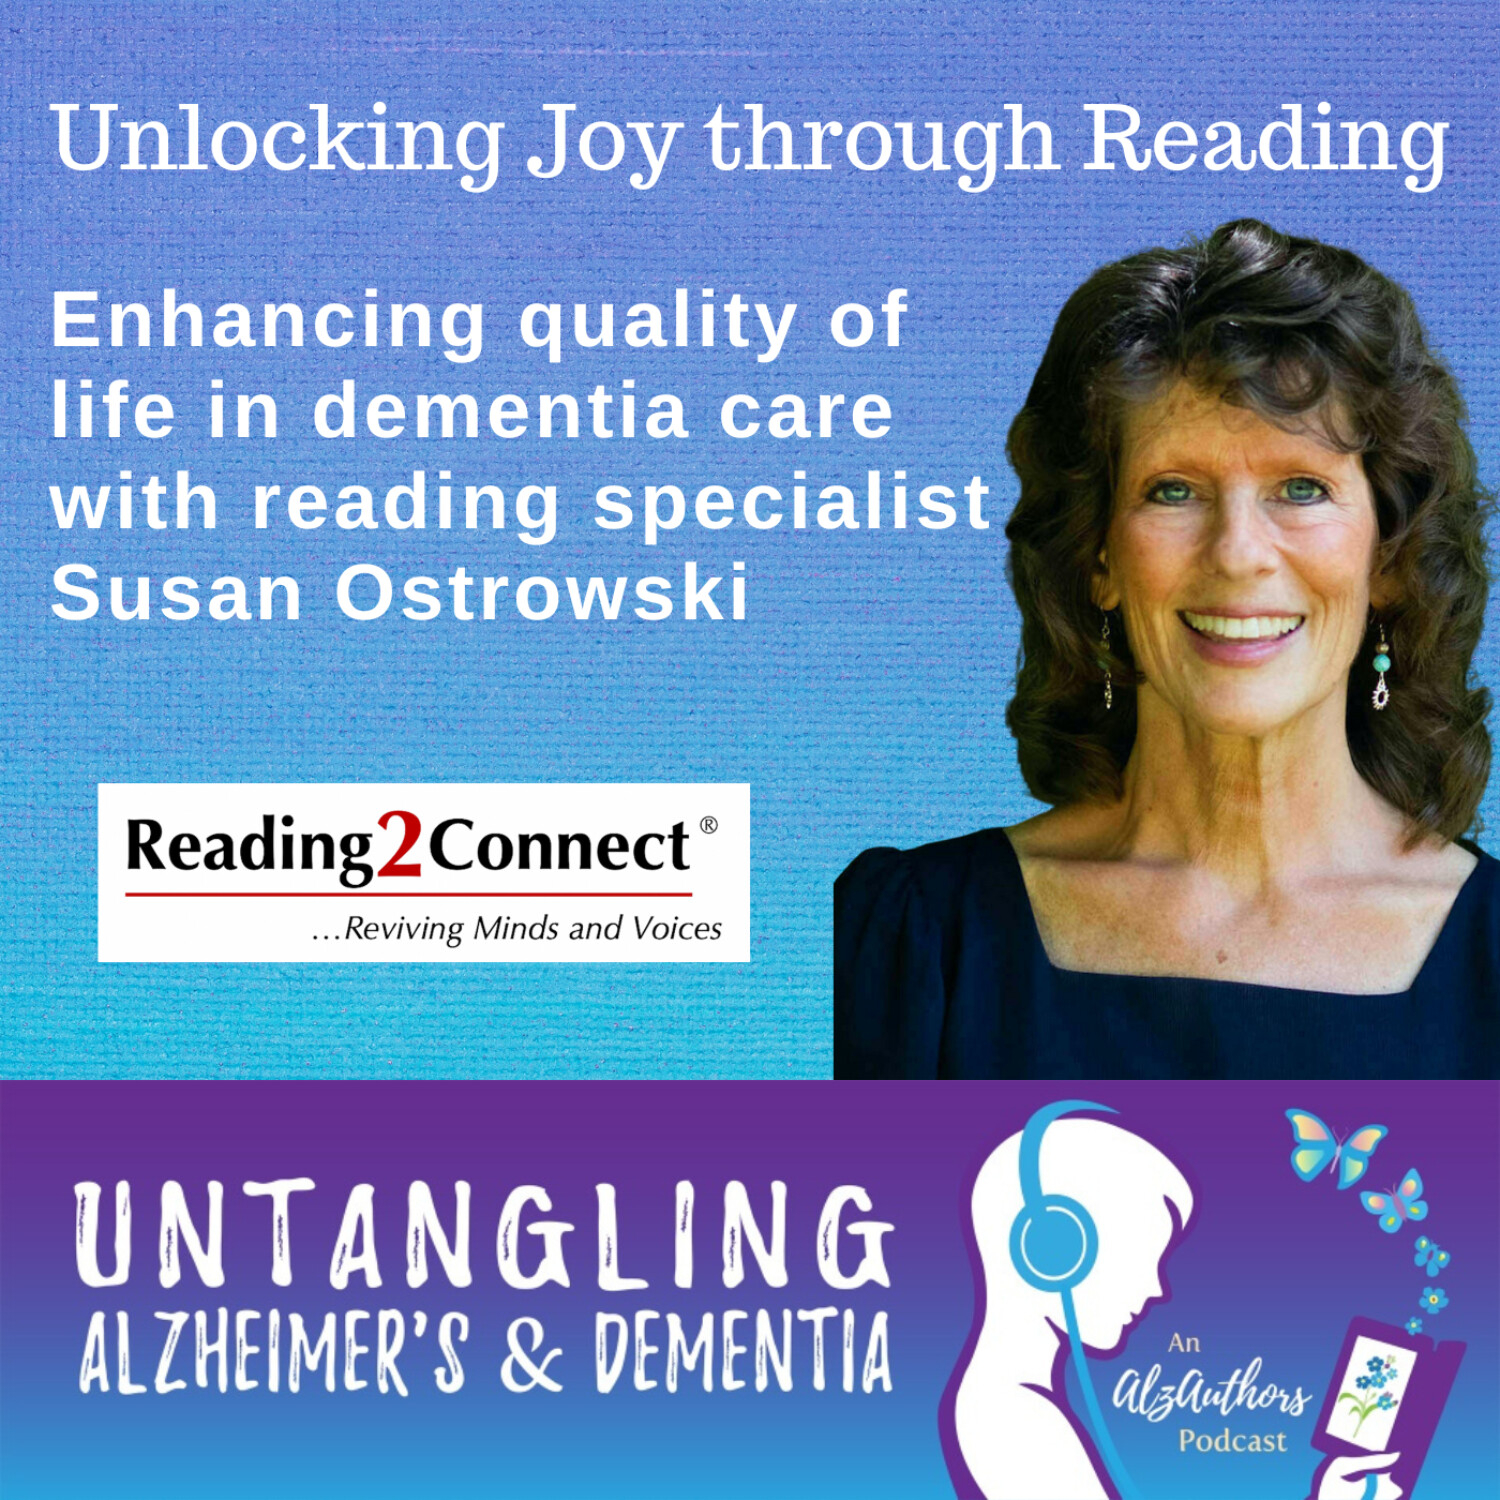 Unlocking Joy through Reading: Enhancing quality of life in dementia care with reading specialist, Susan Ostrowski